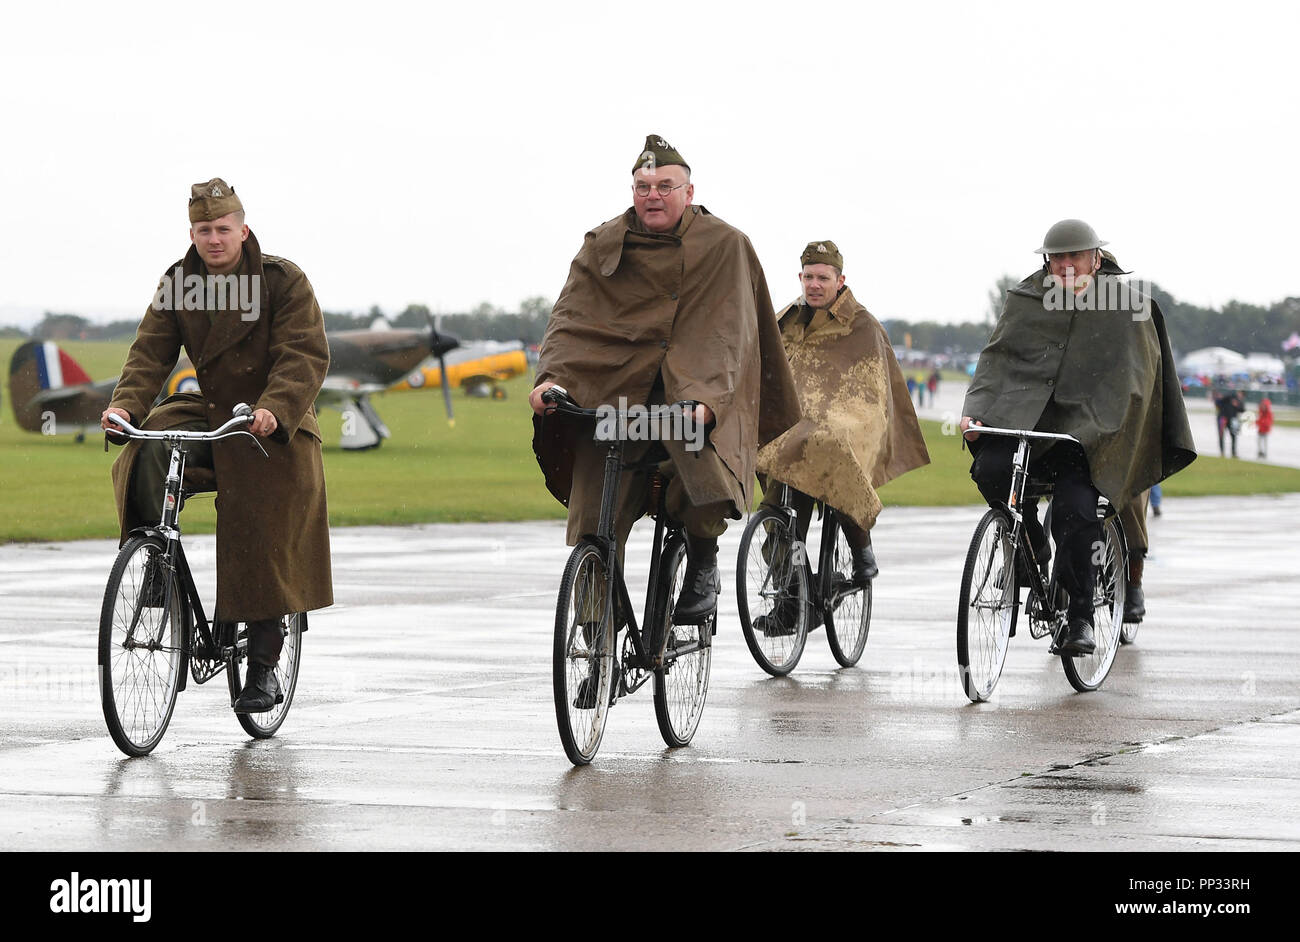 Historical reenactment members cycle along the taxiway during the Battle of Britain Air Show at the Imperial War Museum in Duxford, Cambridgeshire. Stock Photo